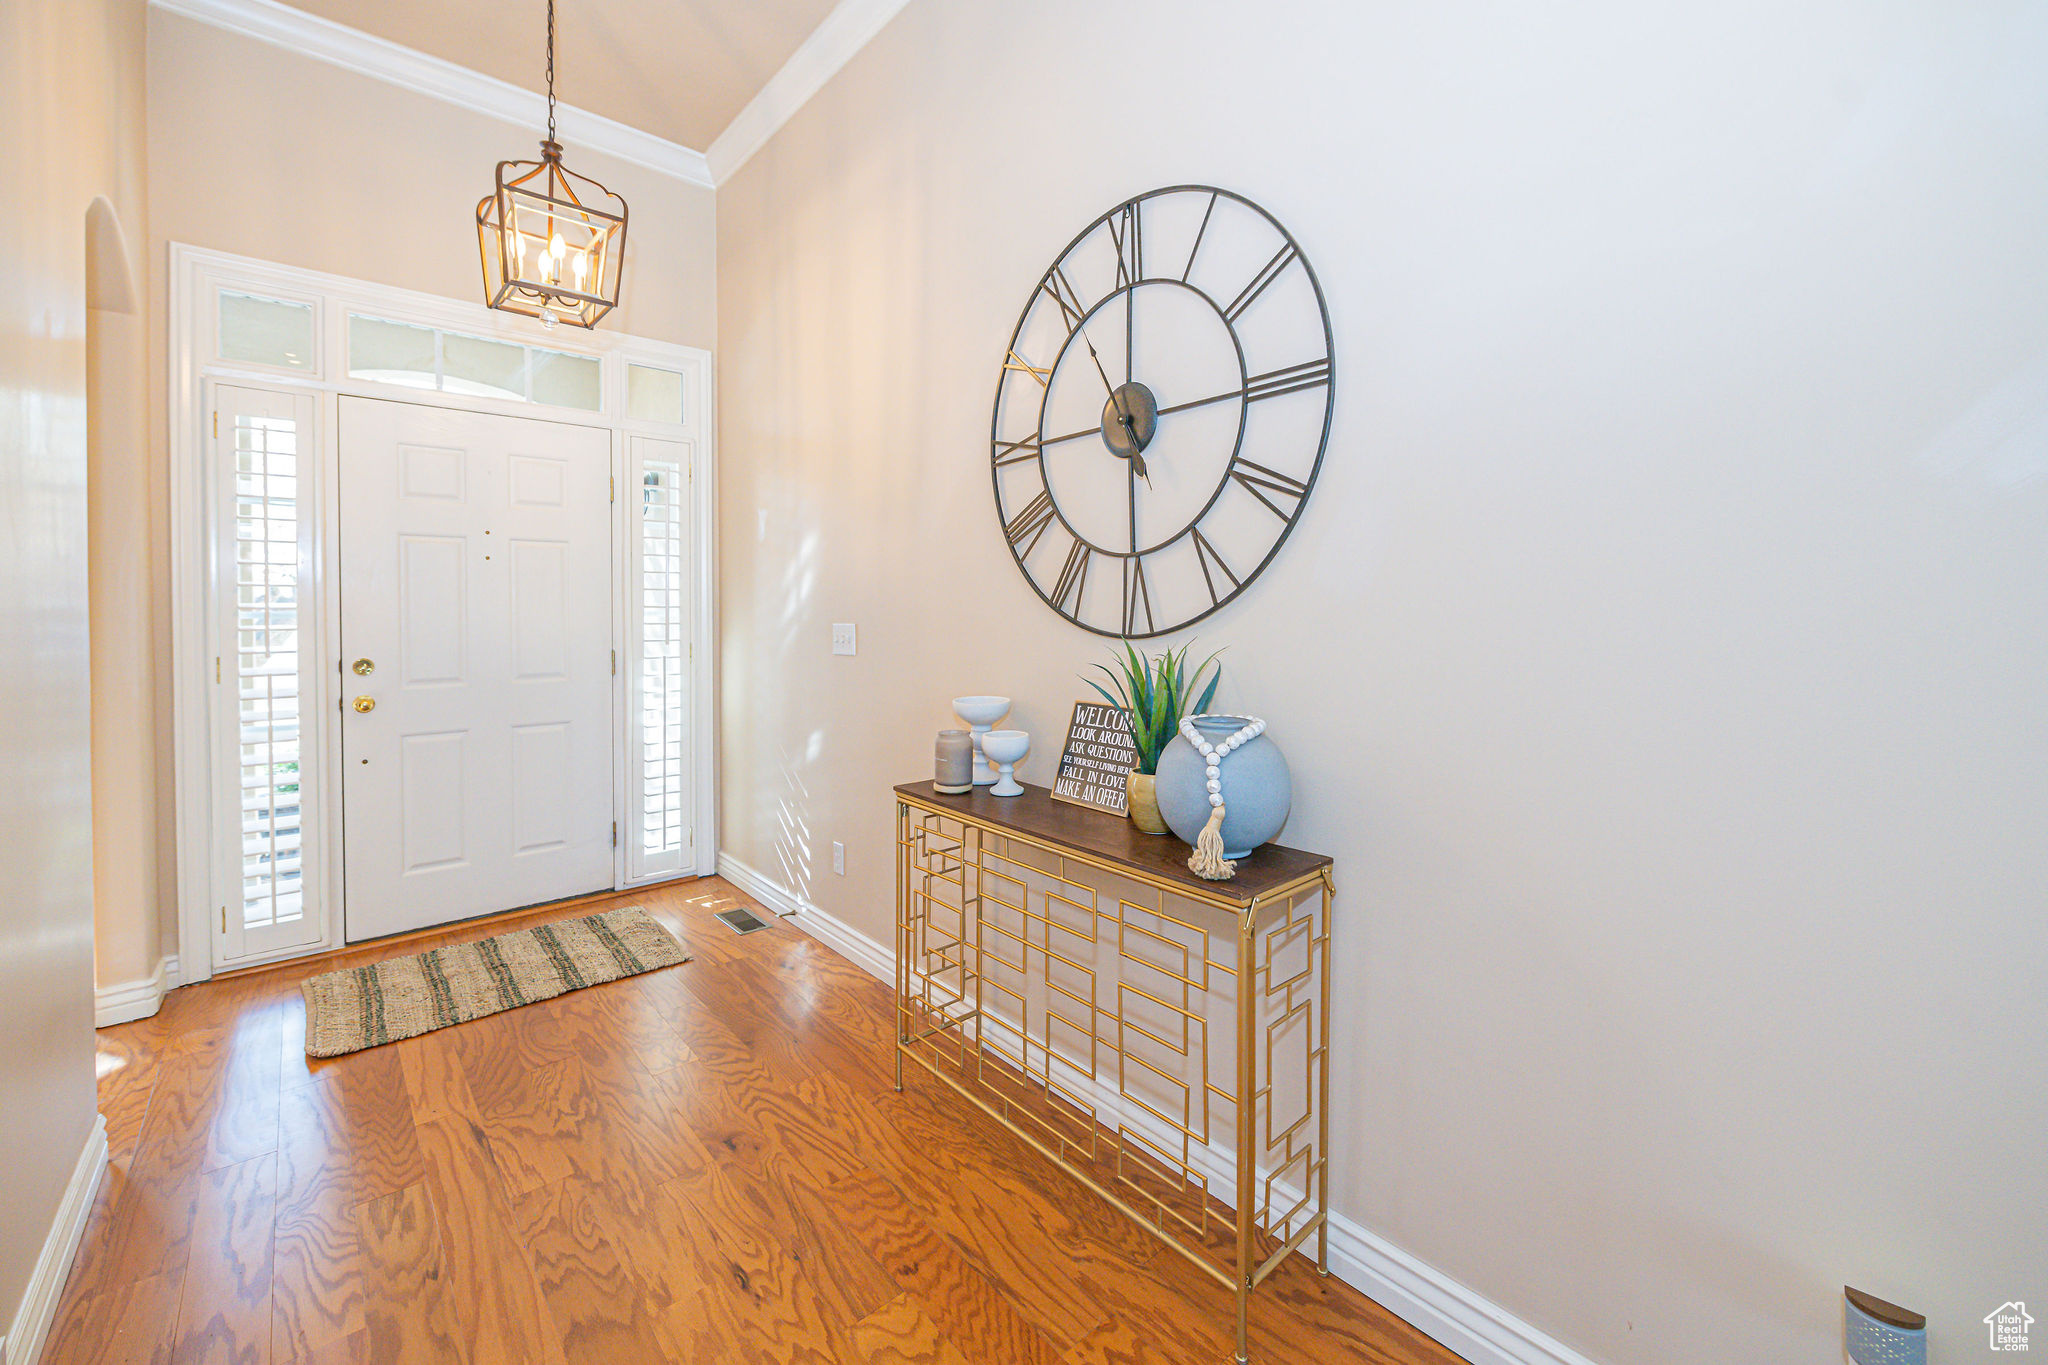 Entrance foyer with crown molding, an inviting chandelier, and hardwood / wood-style floors